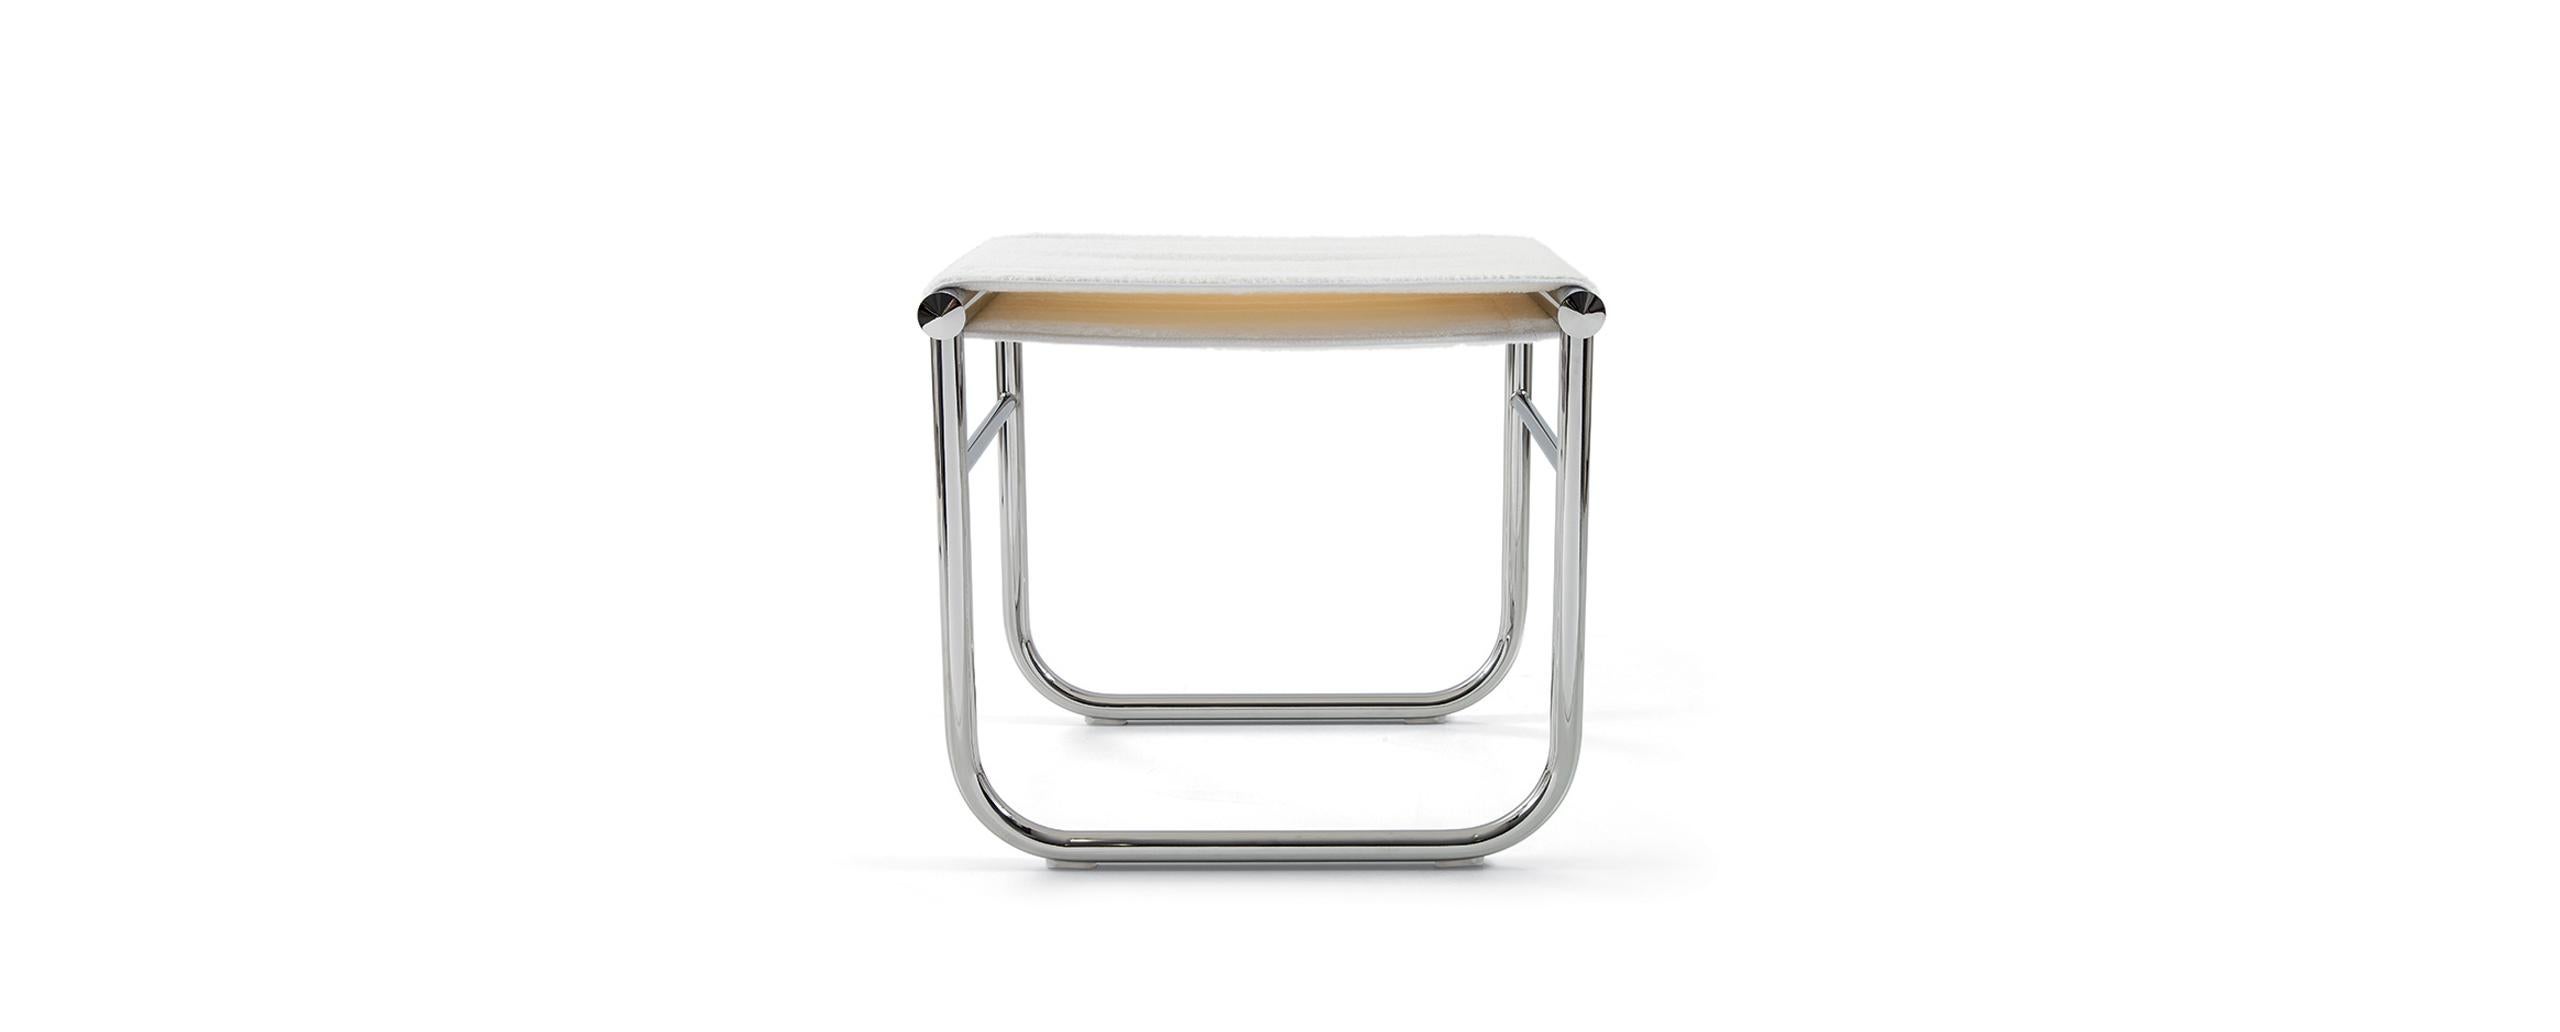 Stool designed by Charlotte Perriand in 1927. Relaunched by Cassina in 1973/2014. Manufactured by Cassina in Italy.

Designed by Charlotte Perriand and part of the LC collection by Le Corbusier, Pierre Jeanneret and Charlotte Perriand.

A stool with